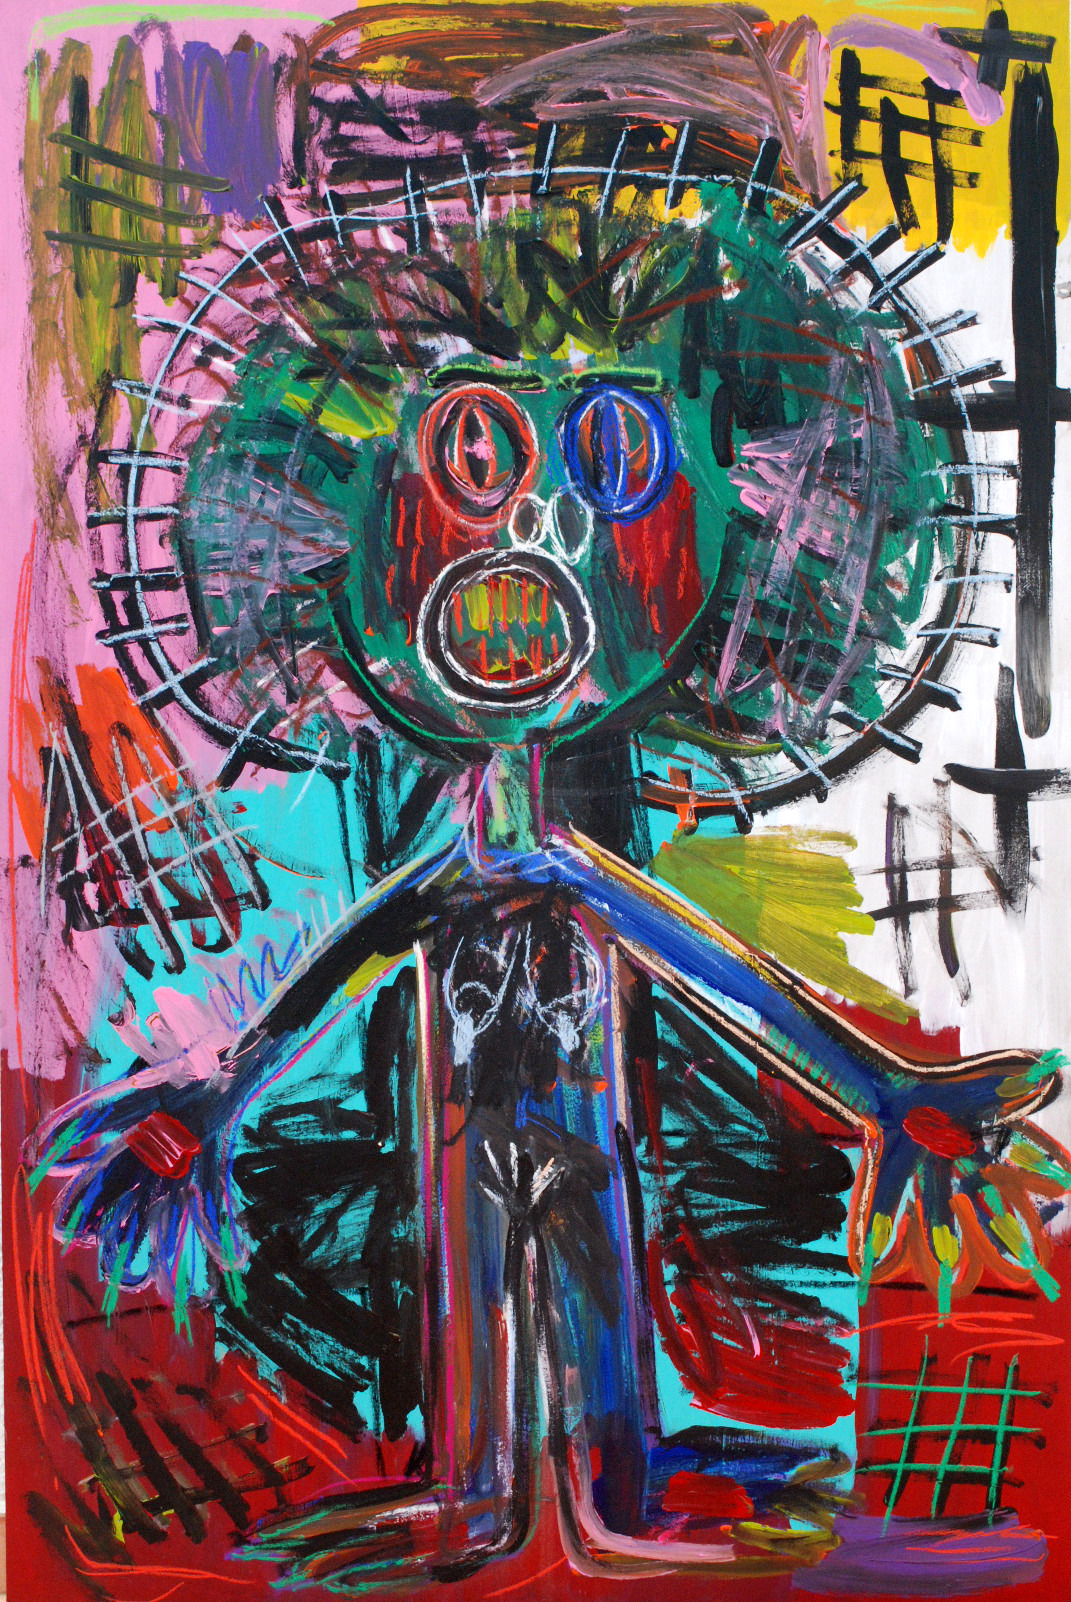    “Crucifixion” , 2012   Acrylic paint and pastel on wood, 90 x 130 cm 